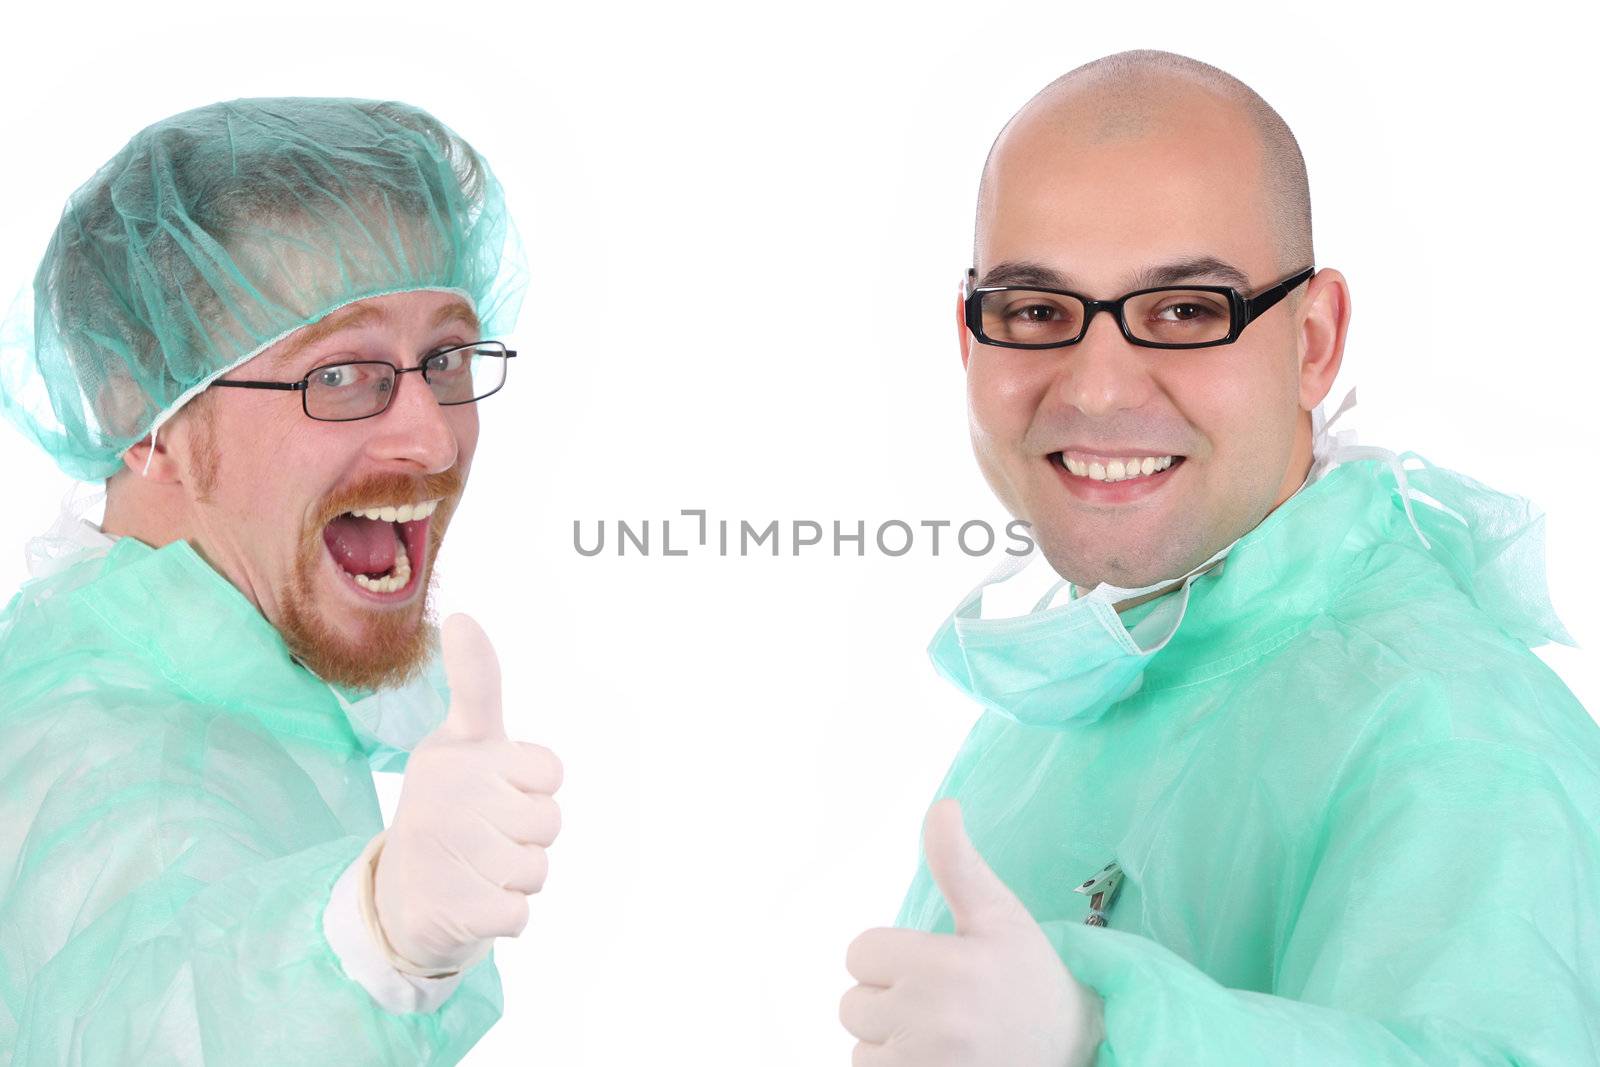 Details two surgeon happiness on white background